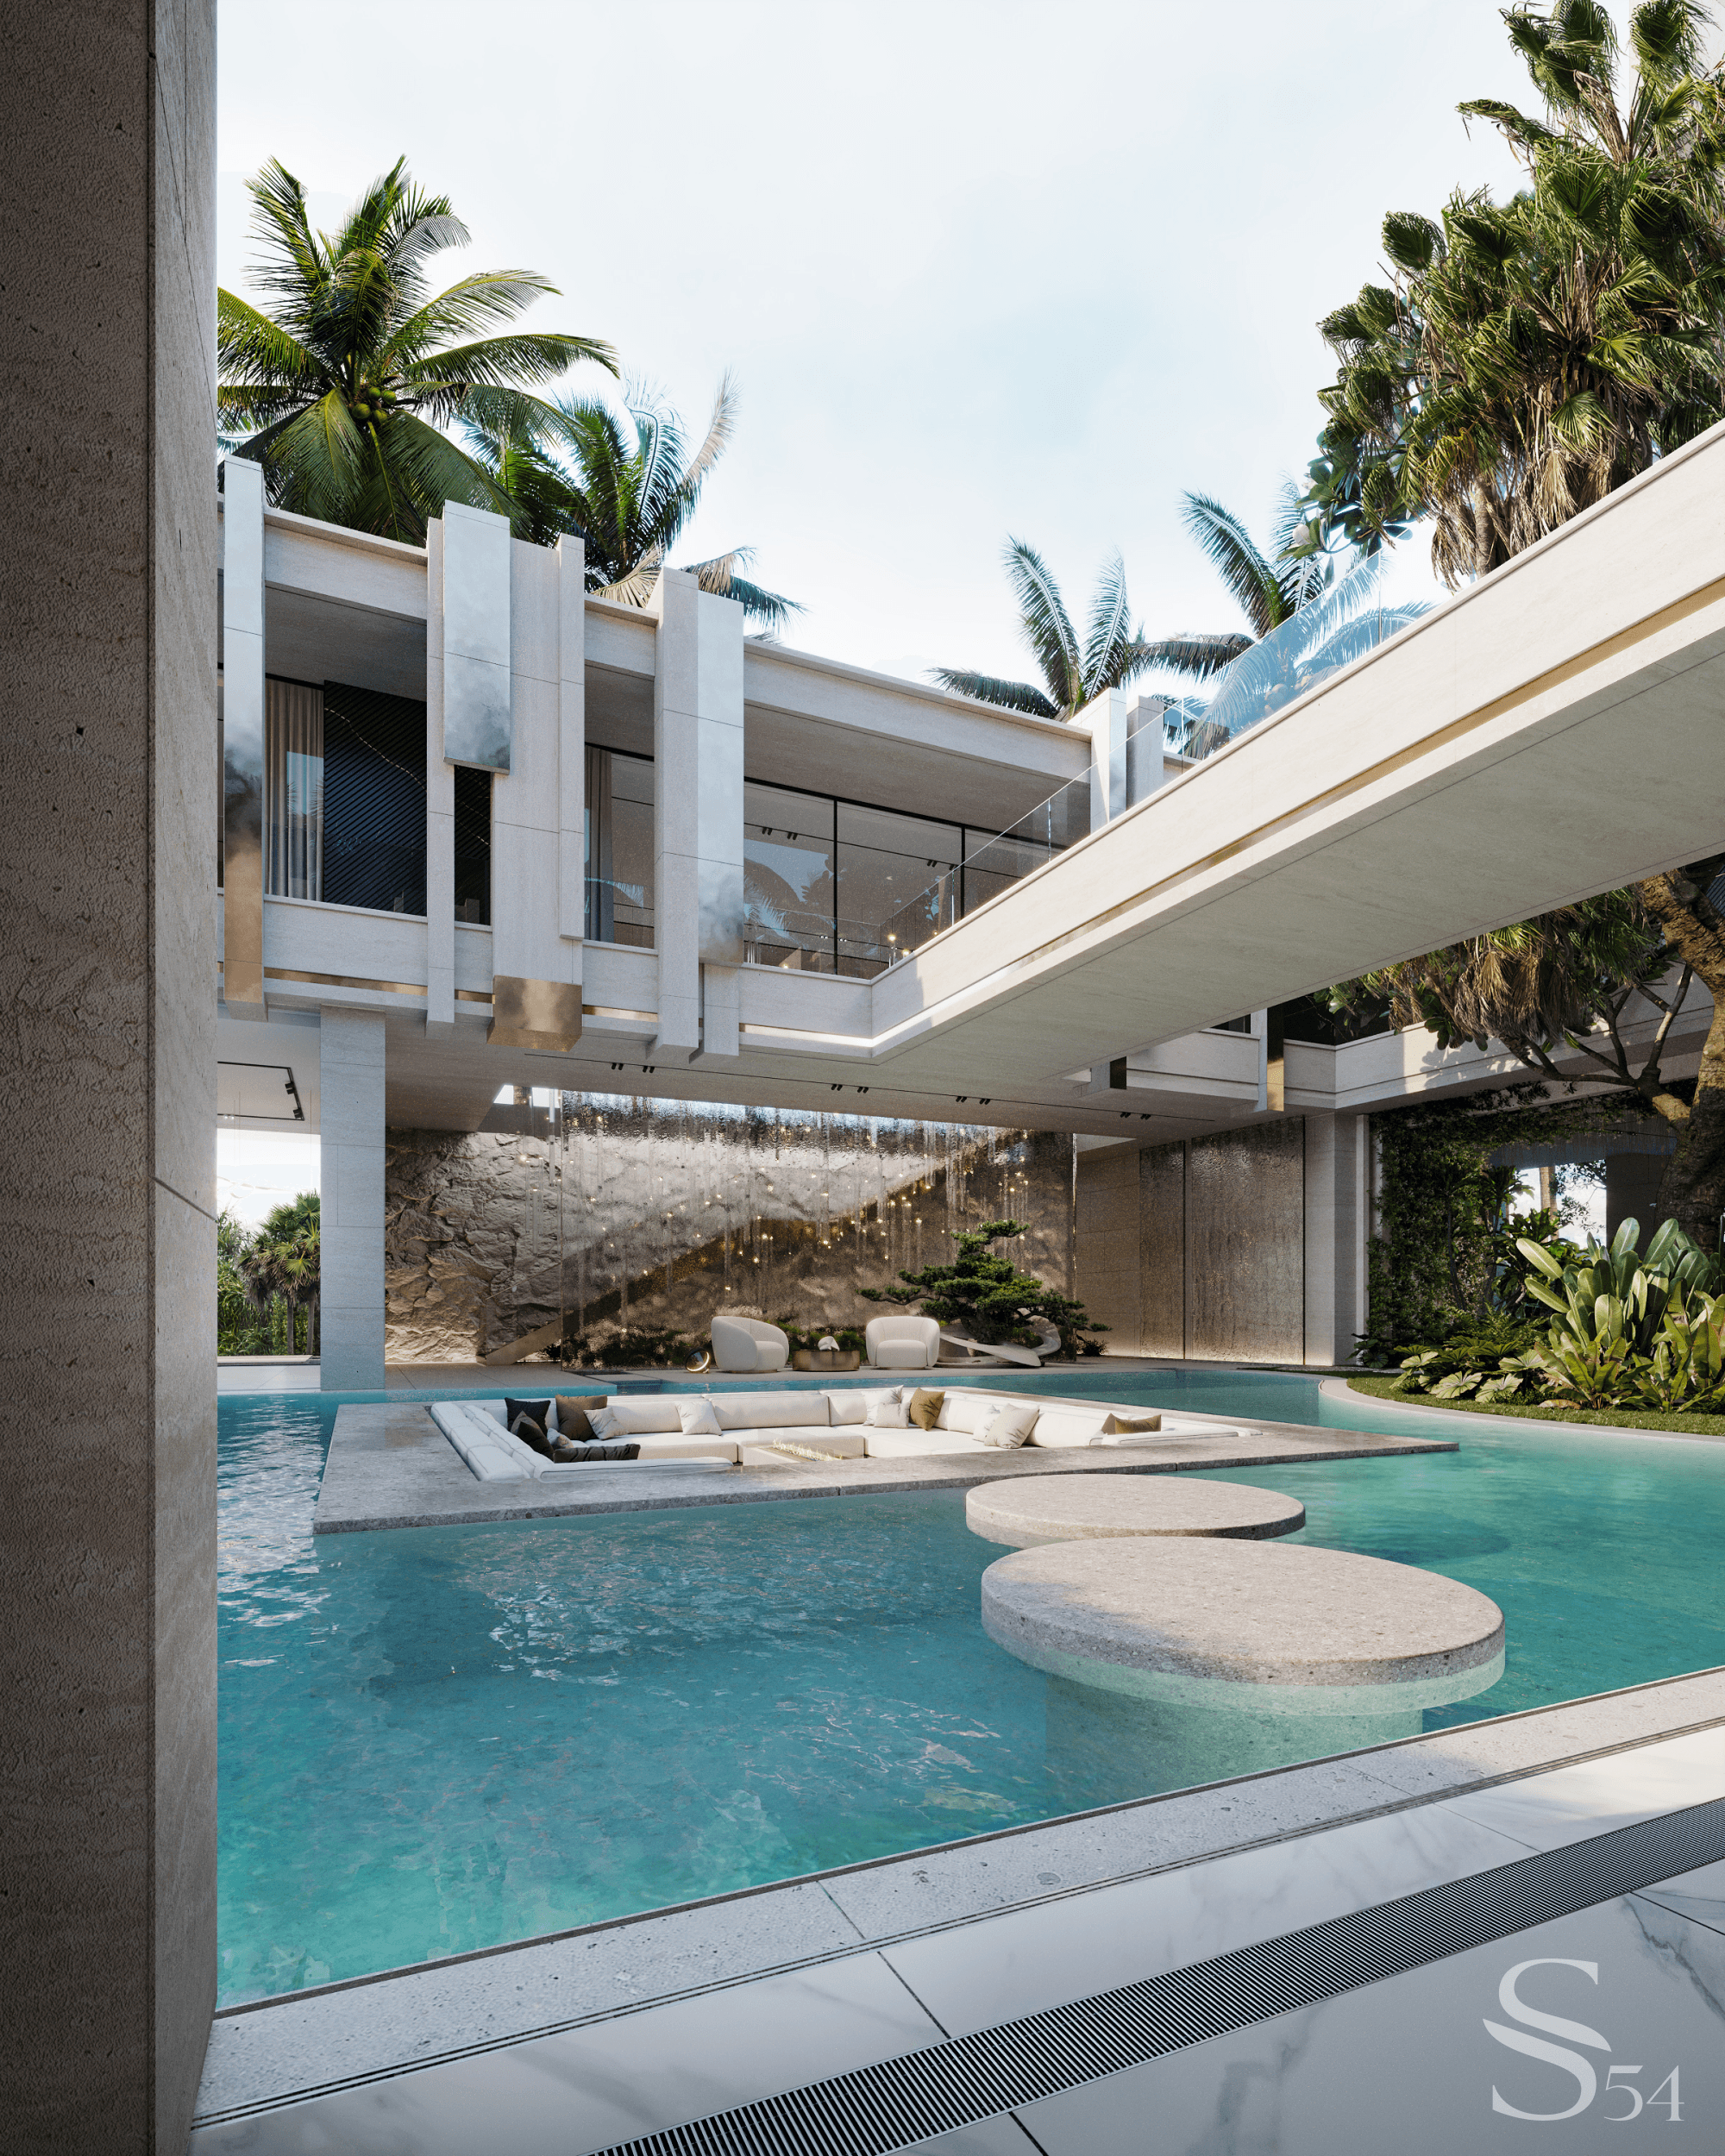 Inside the indoor pool, there is a lounge area with a hearth, which can be approached by spectacular concrete slabs